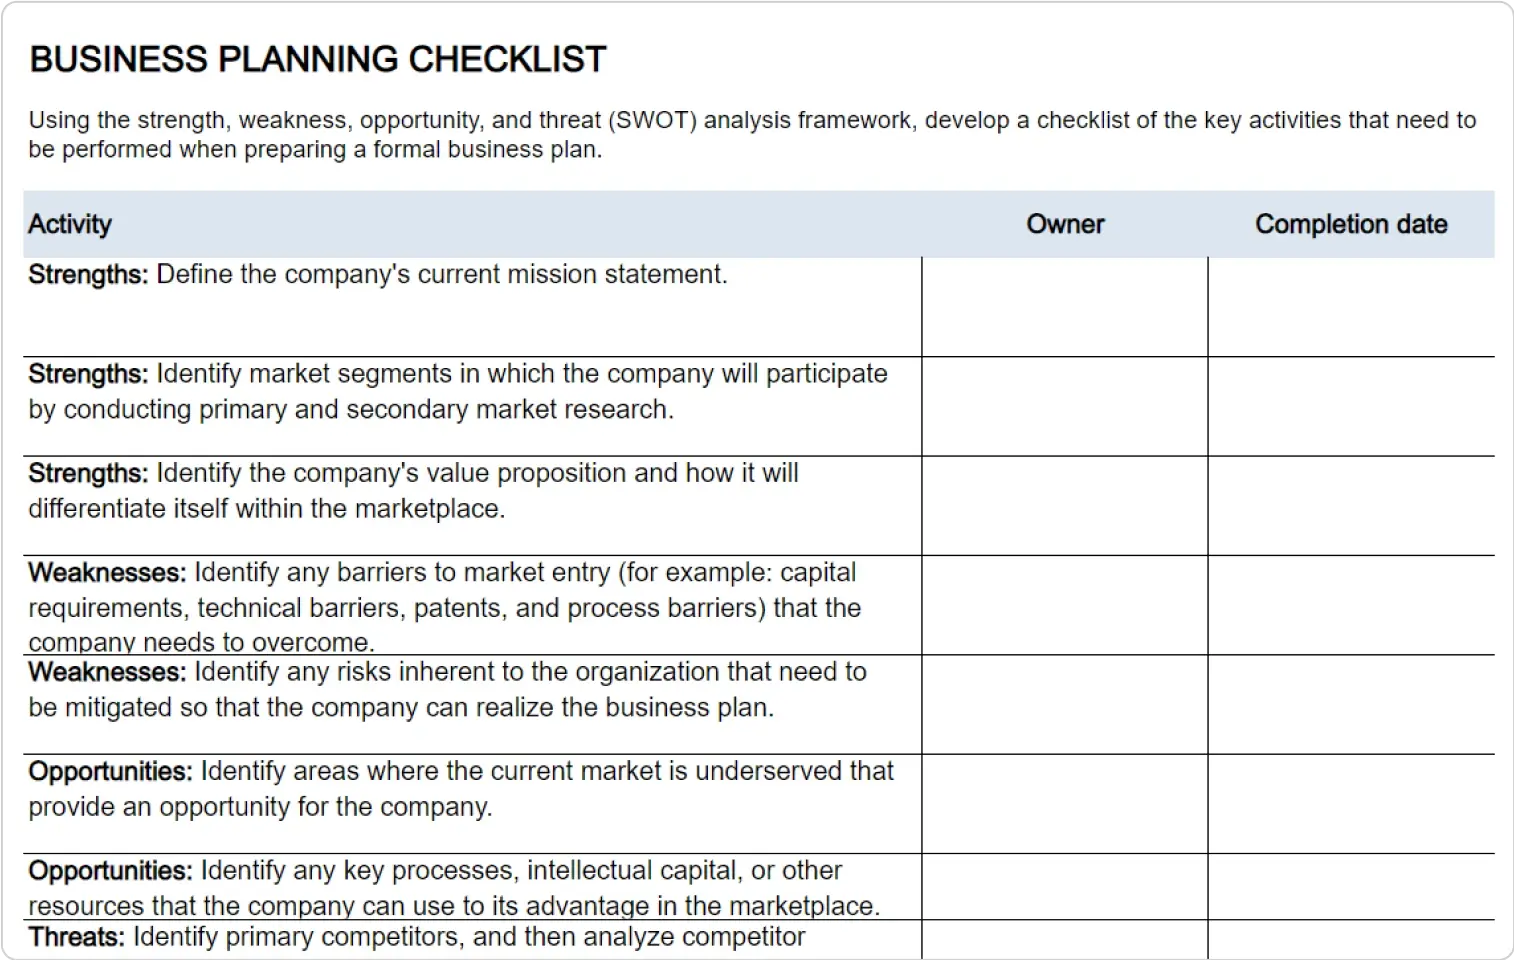 Spreadsheet showing a business planning checklist from Microsoft Create.